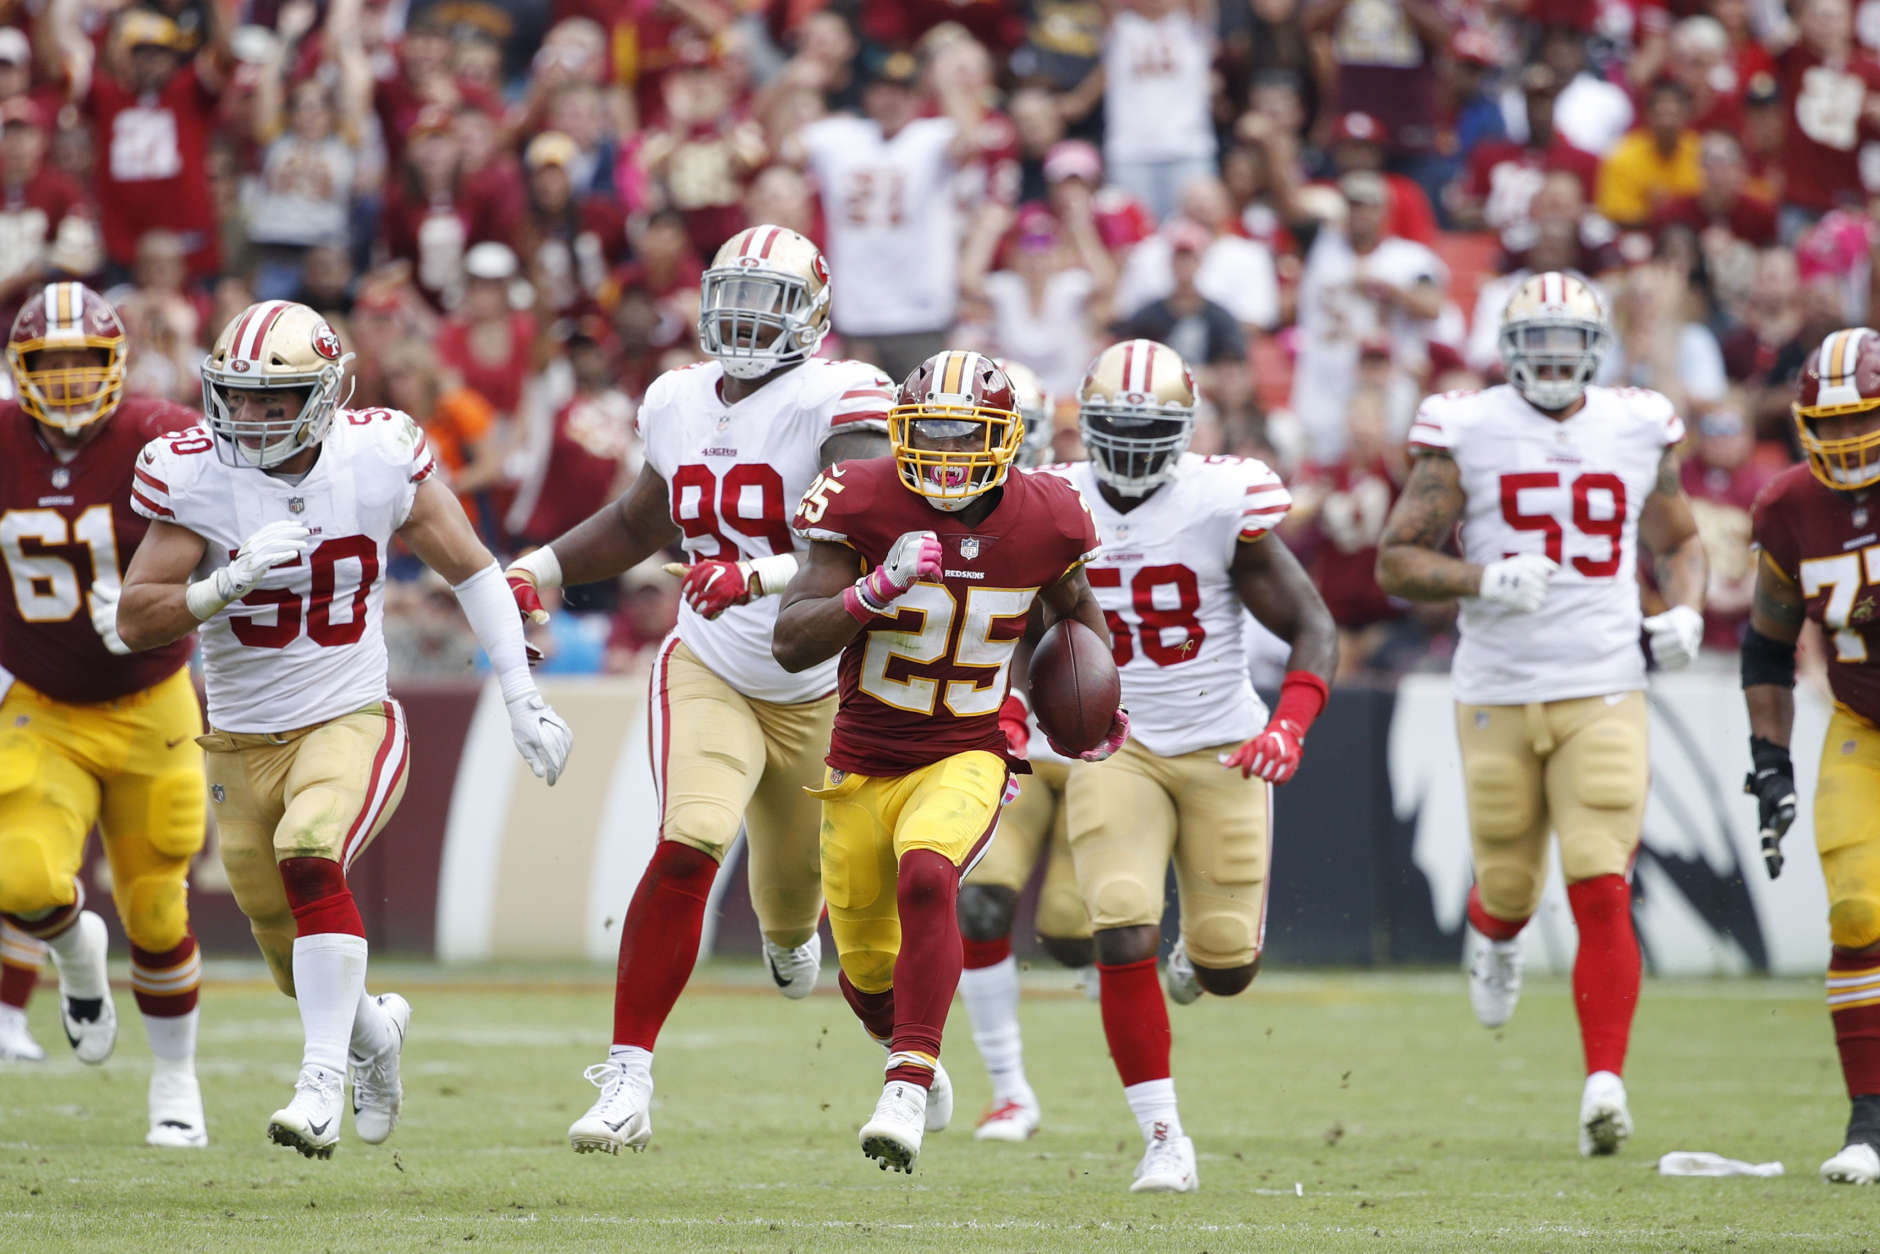 LANDOVER, MD - OCTOBER 15: Chris Thompson #25 of the Washington Redskins runs for 49 yards after a catch to set up a field goal in the second quarter of a game against the San Francisco 49ers at FedEx Field on October 15, 2017 in Landover, Maryland. (Photo by Joe Robbins/Getty Images)